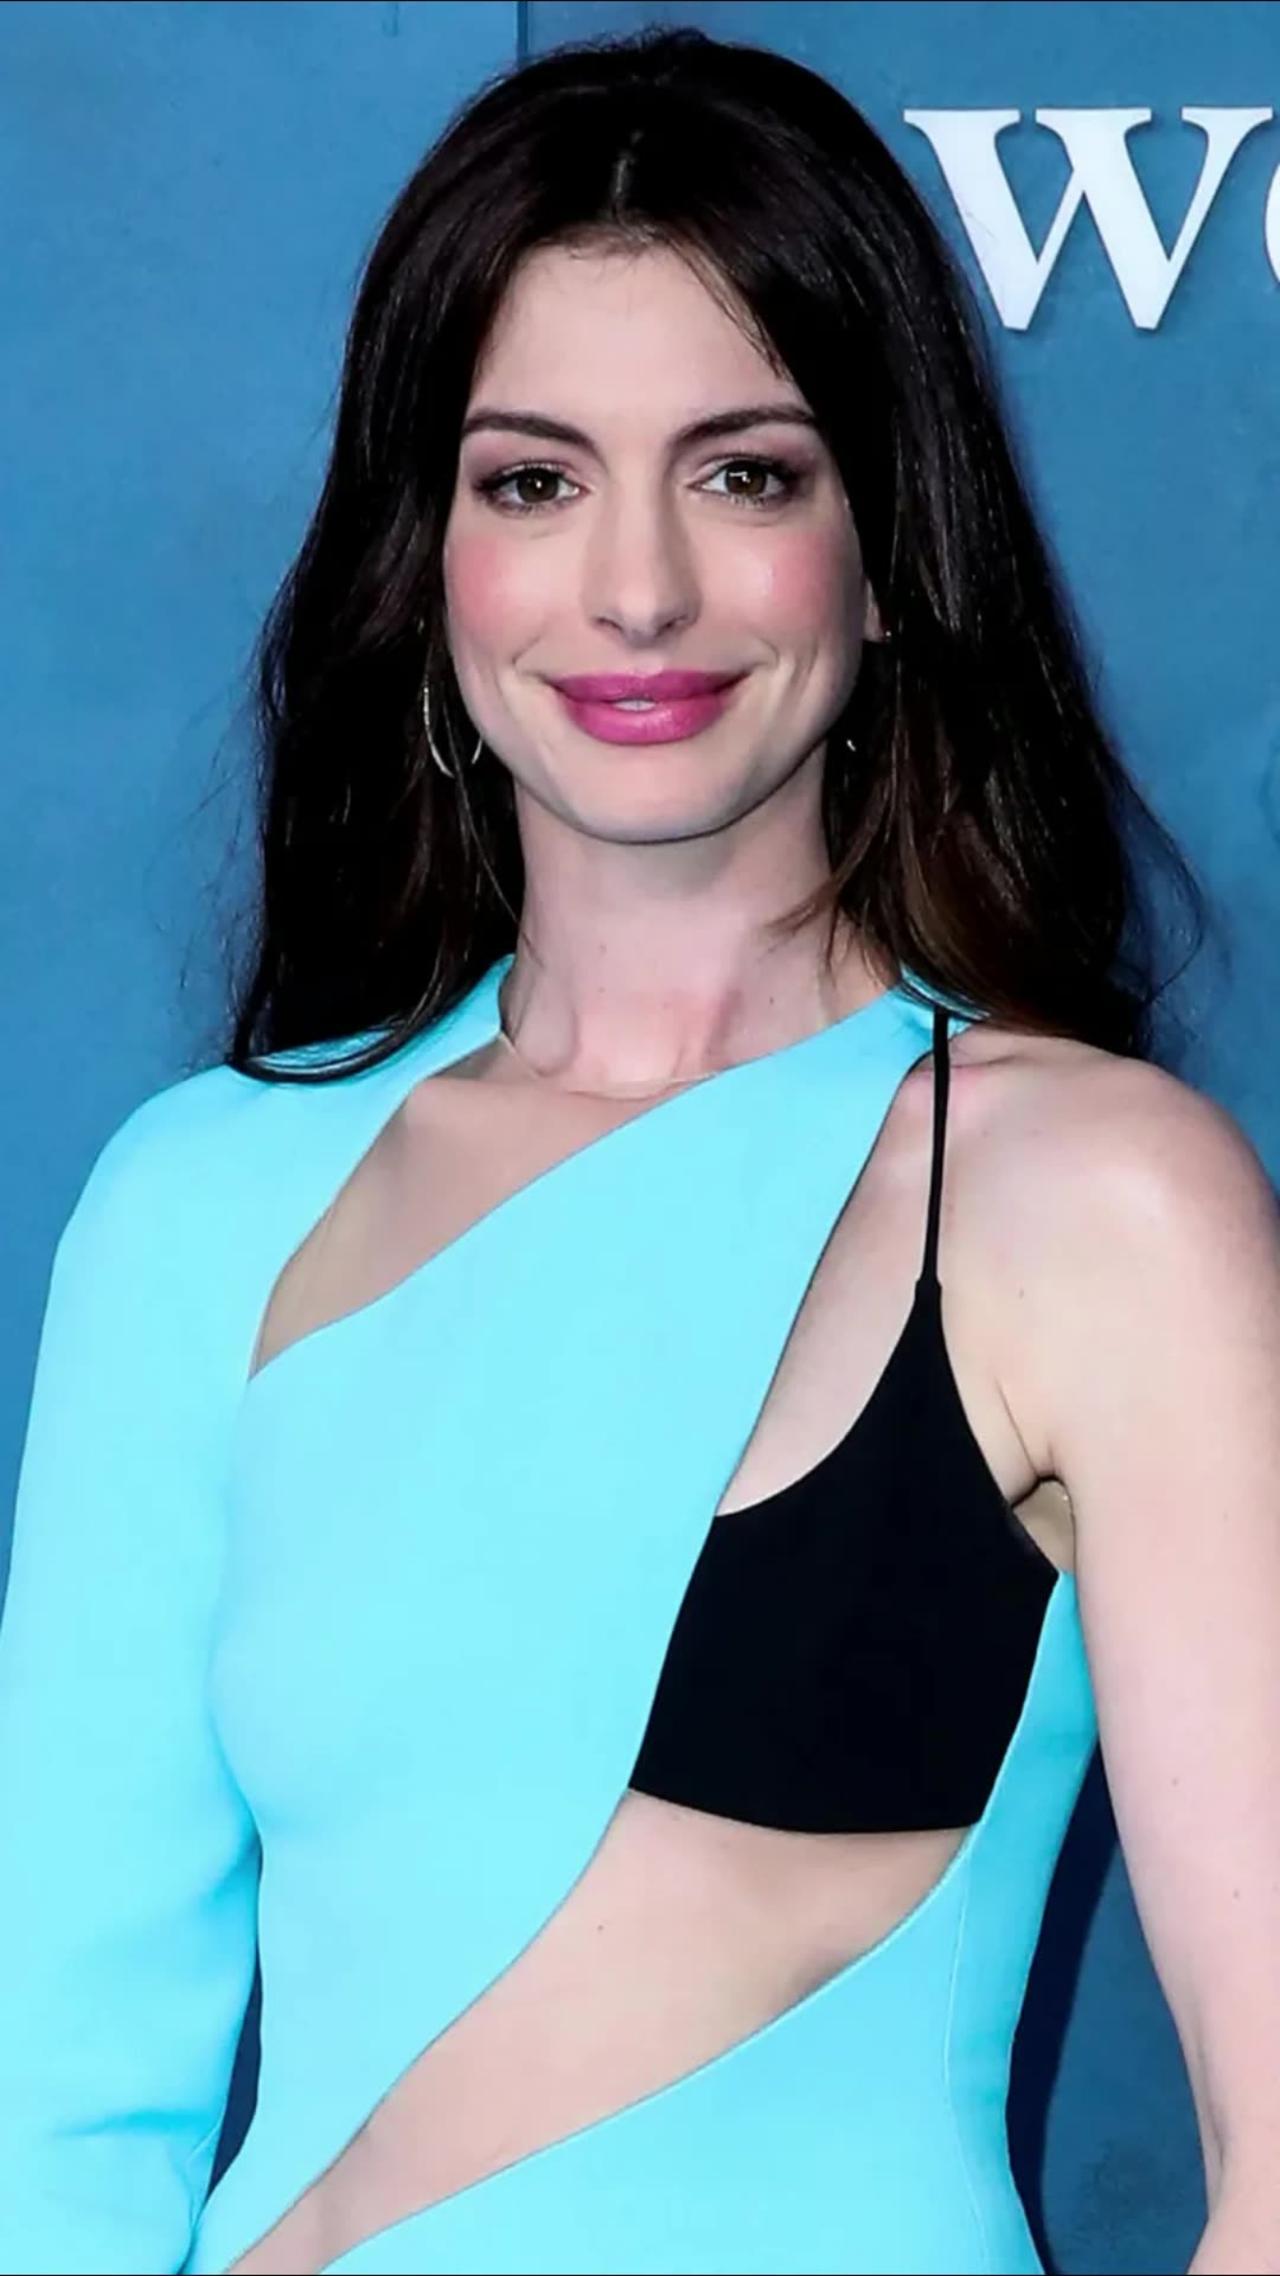 Anne Hathaway: From Princess to Oscar Winner